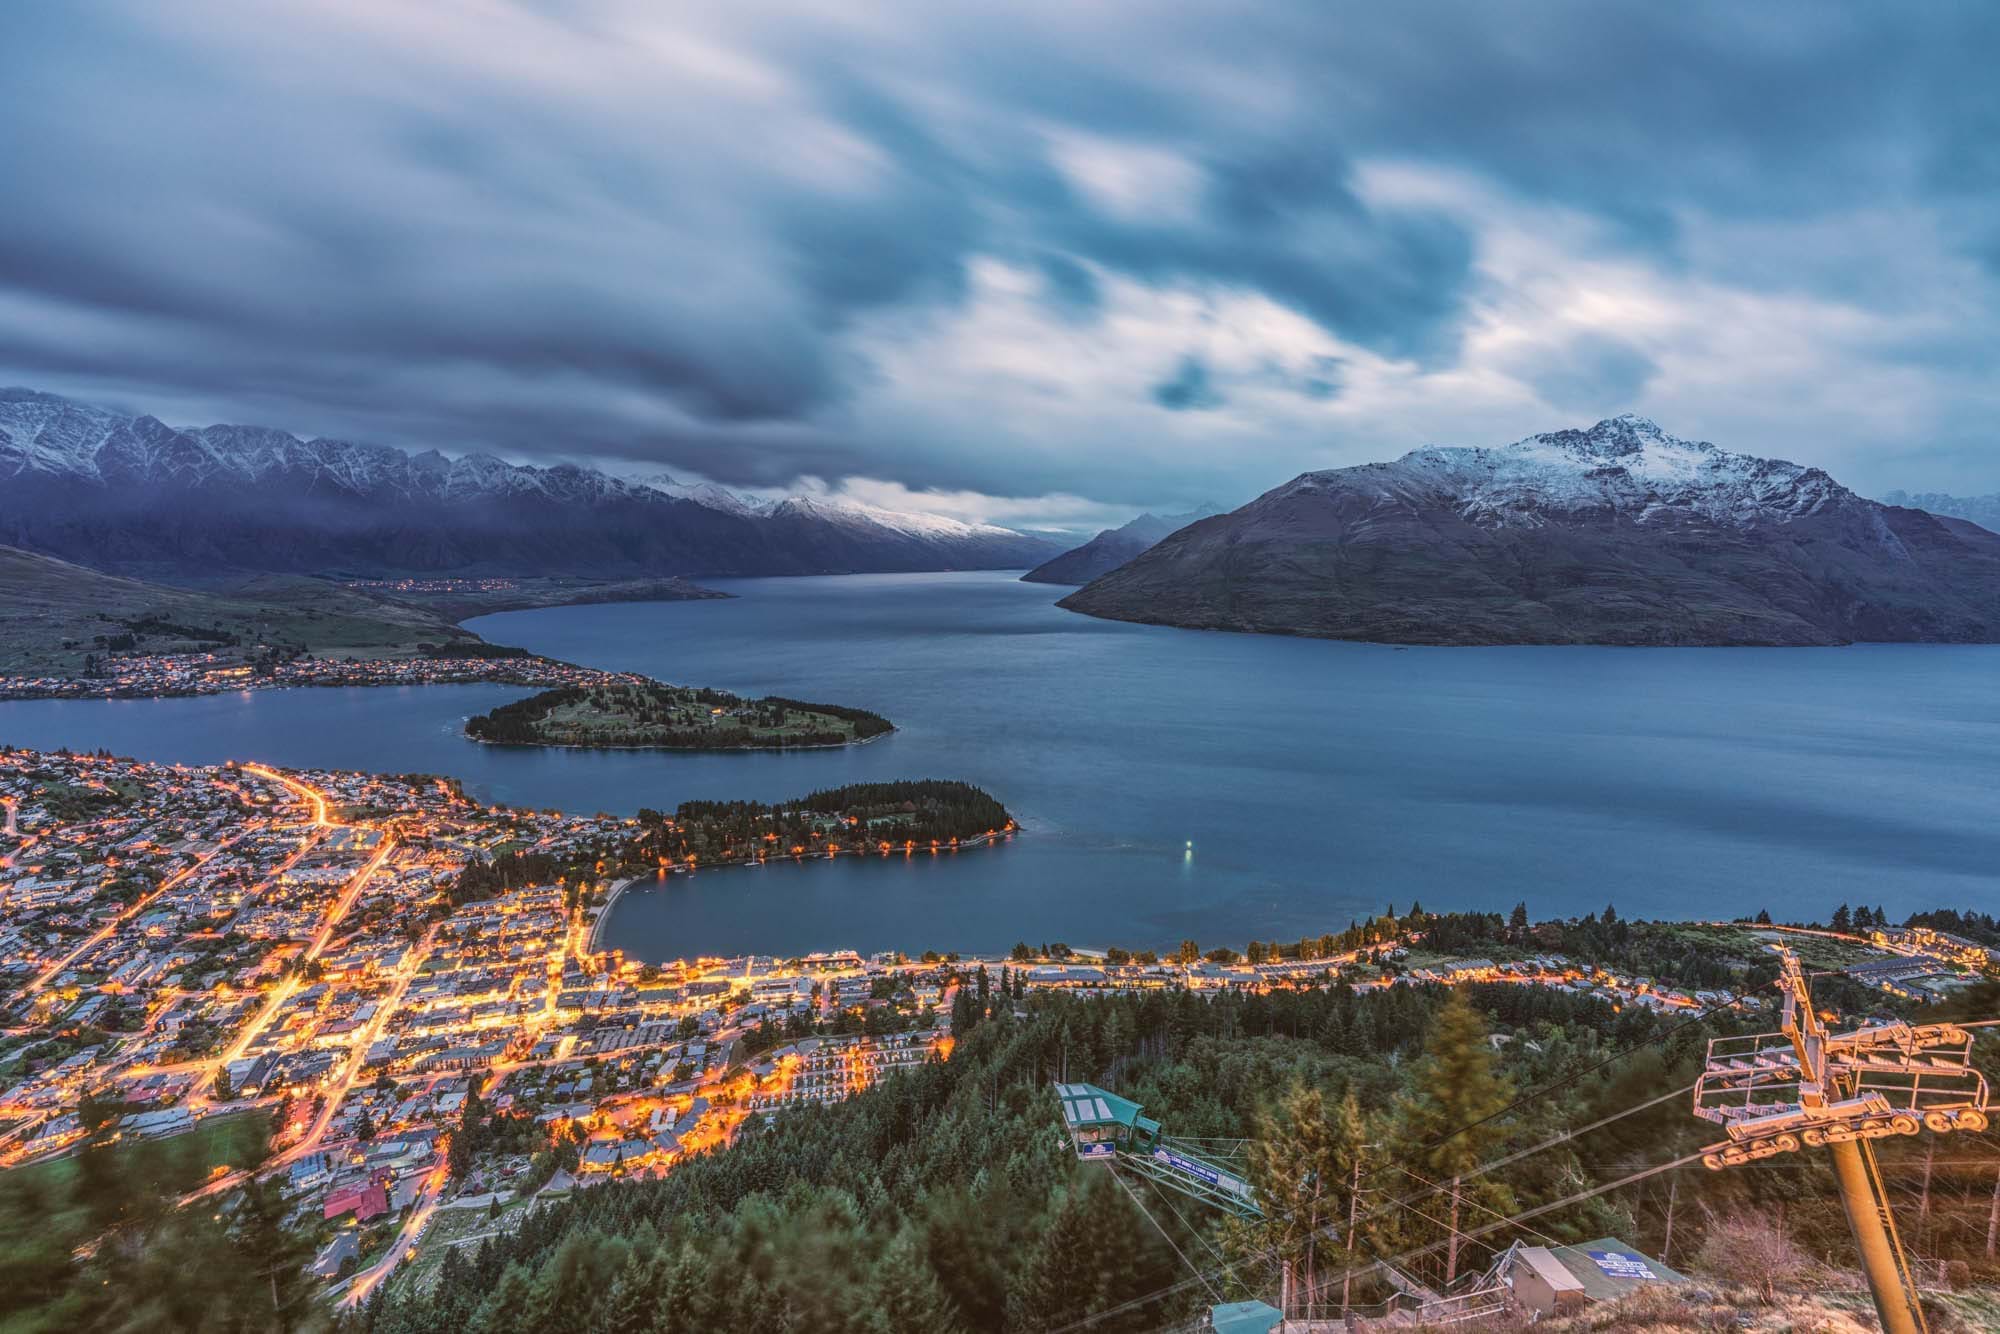 View of Queenstown at night from Skyline gondola